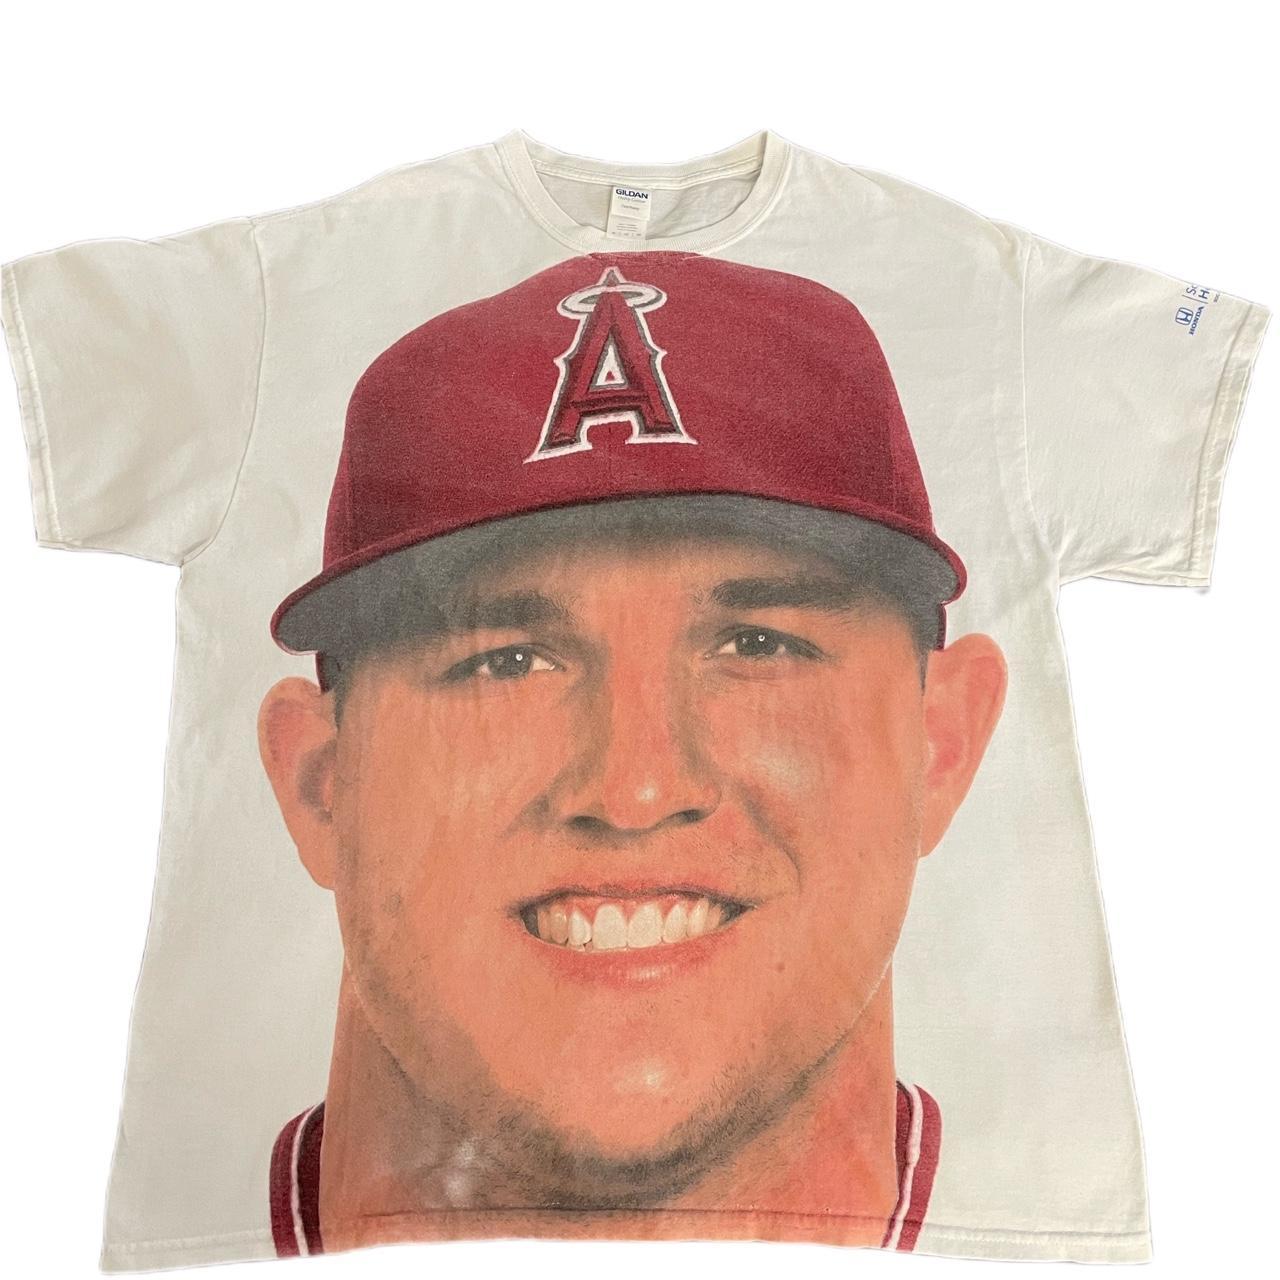 MLB Los Angeles Angels (Mike Trout) Men's T-Shirt.